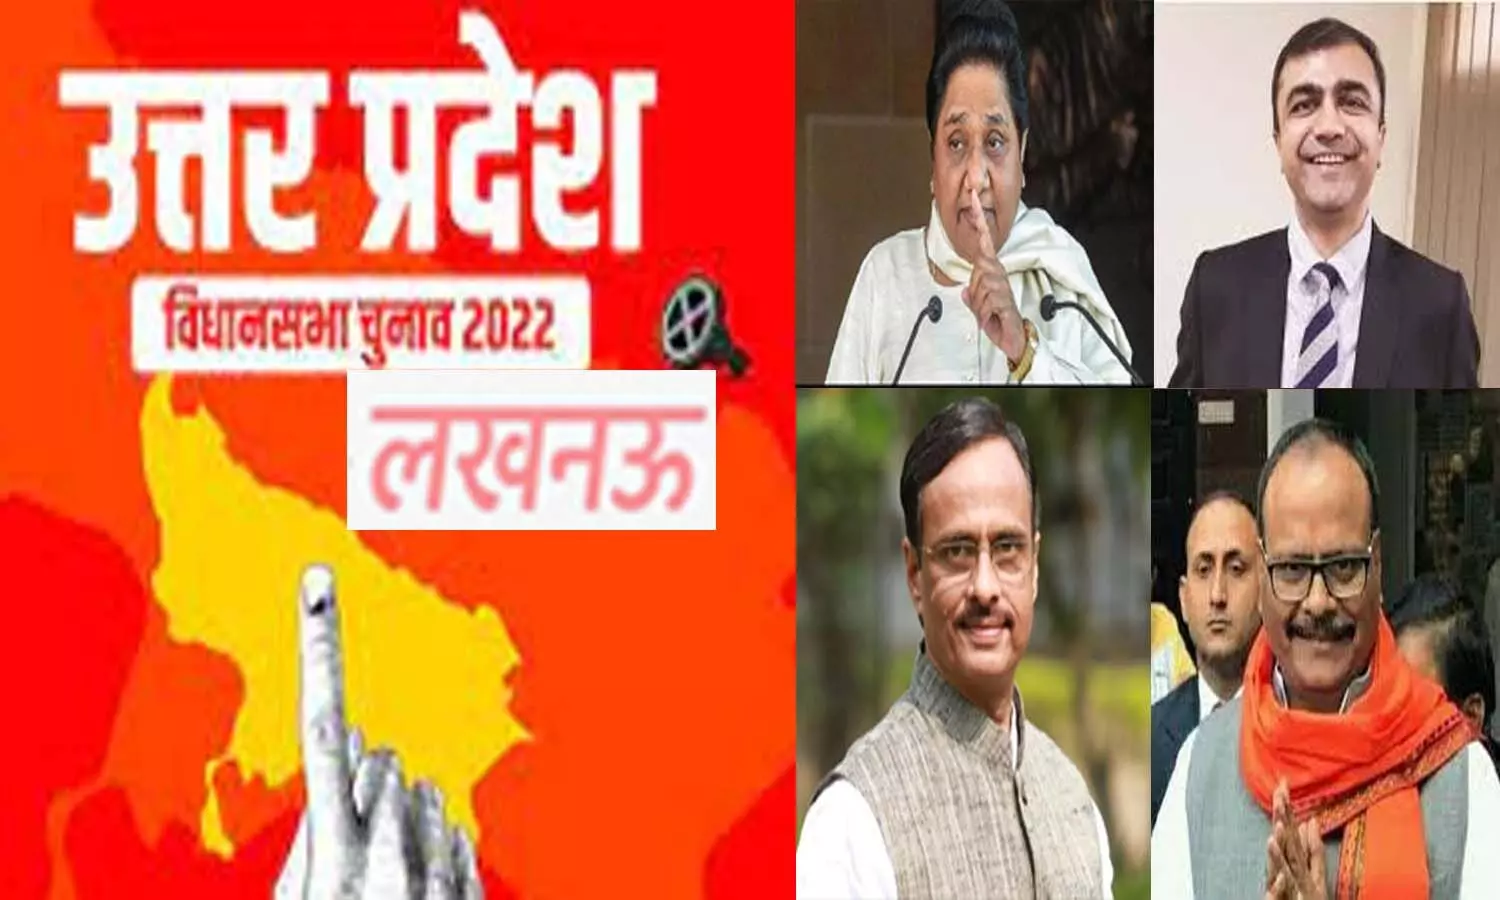 UP Election 2022: VIPs will exercise their franchise in the capital here, know the place and time